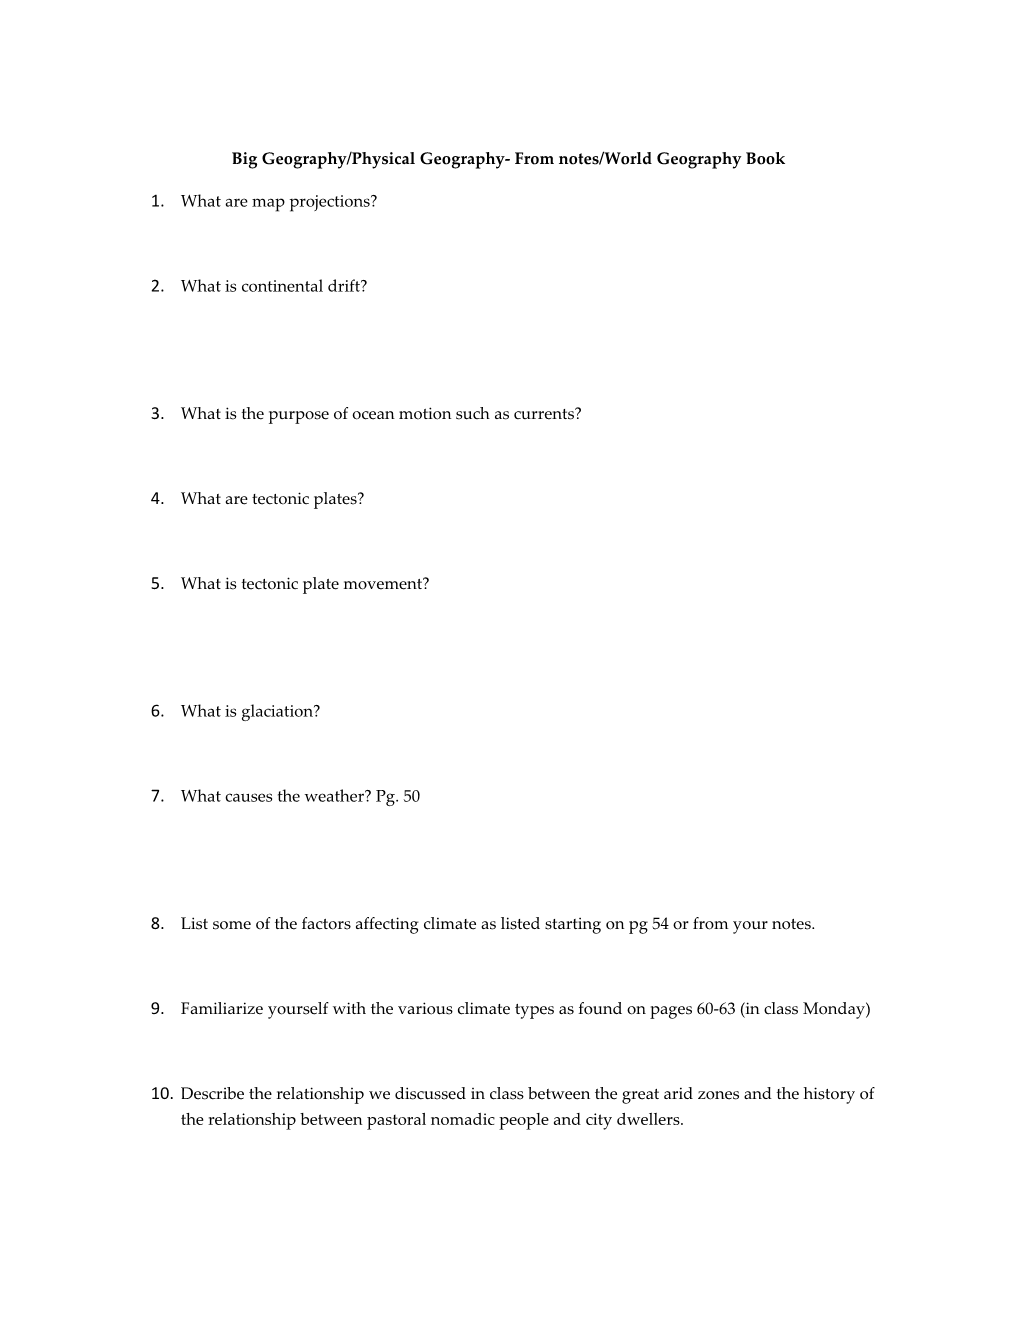 Human Geography Study Guide Ch. 4 from World Geography Text And/Or Notes